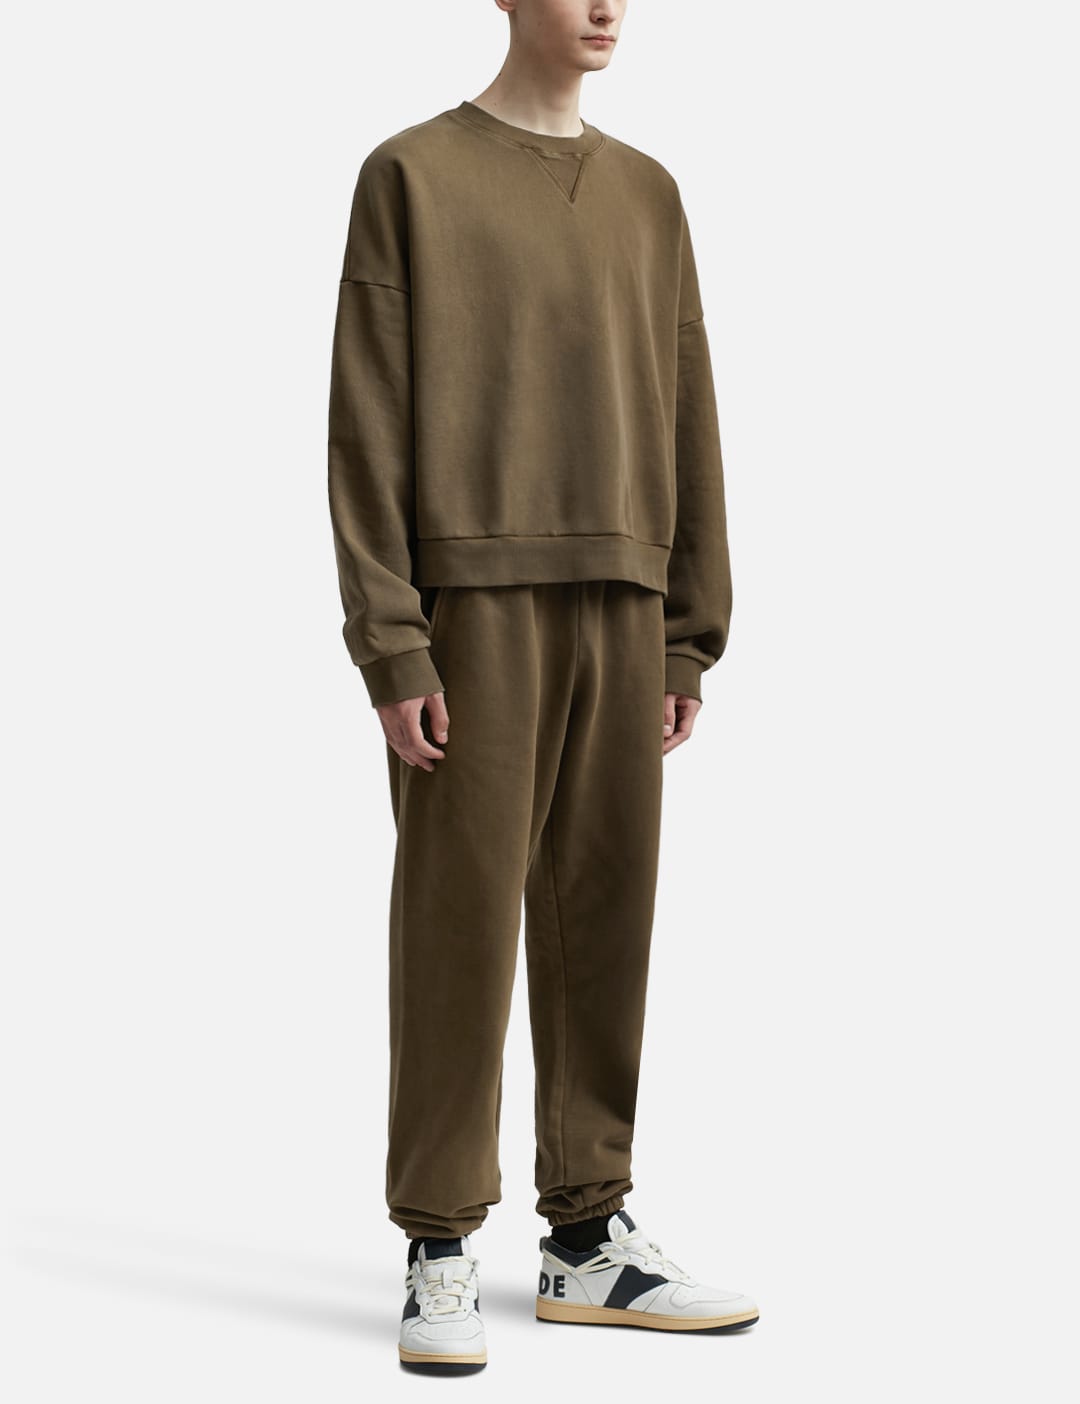 Entire Studios - Heavy Sweatpants | HBX - Globally Curated Fashion 